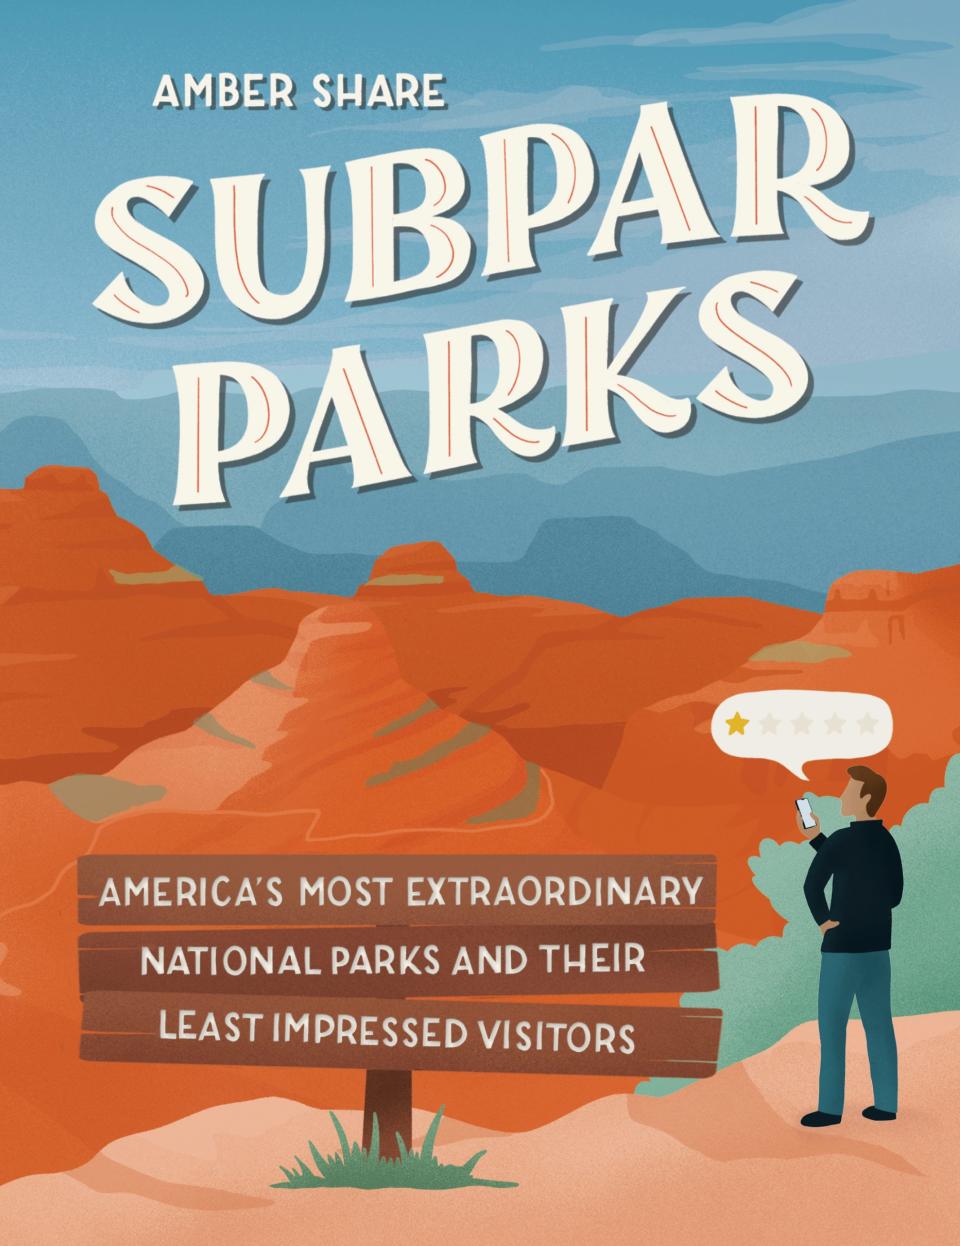 "Subpar Parks" pairs Amber Share's striking illustrations of America's national parks with other people's one-star reviews.